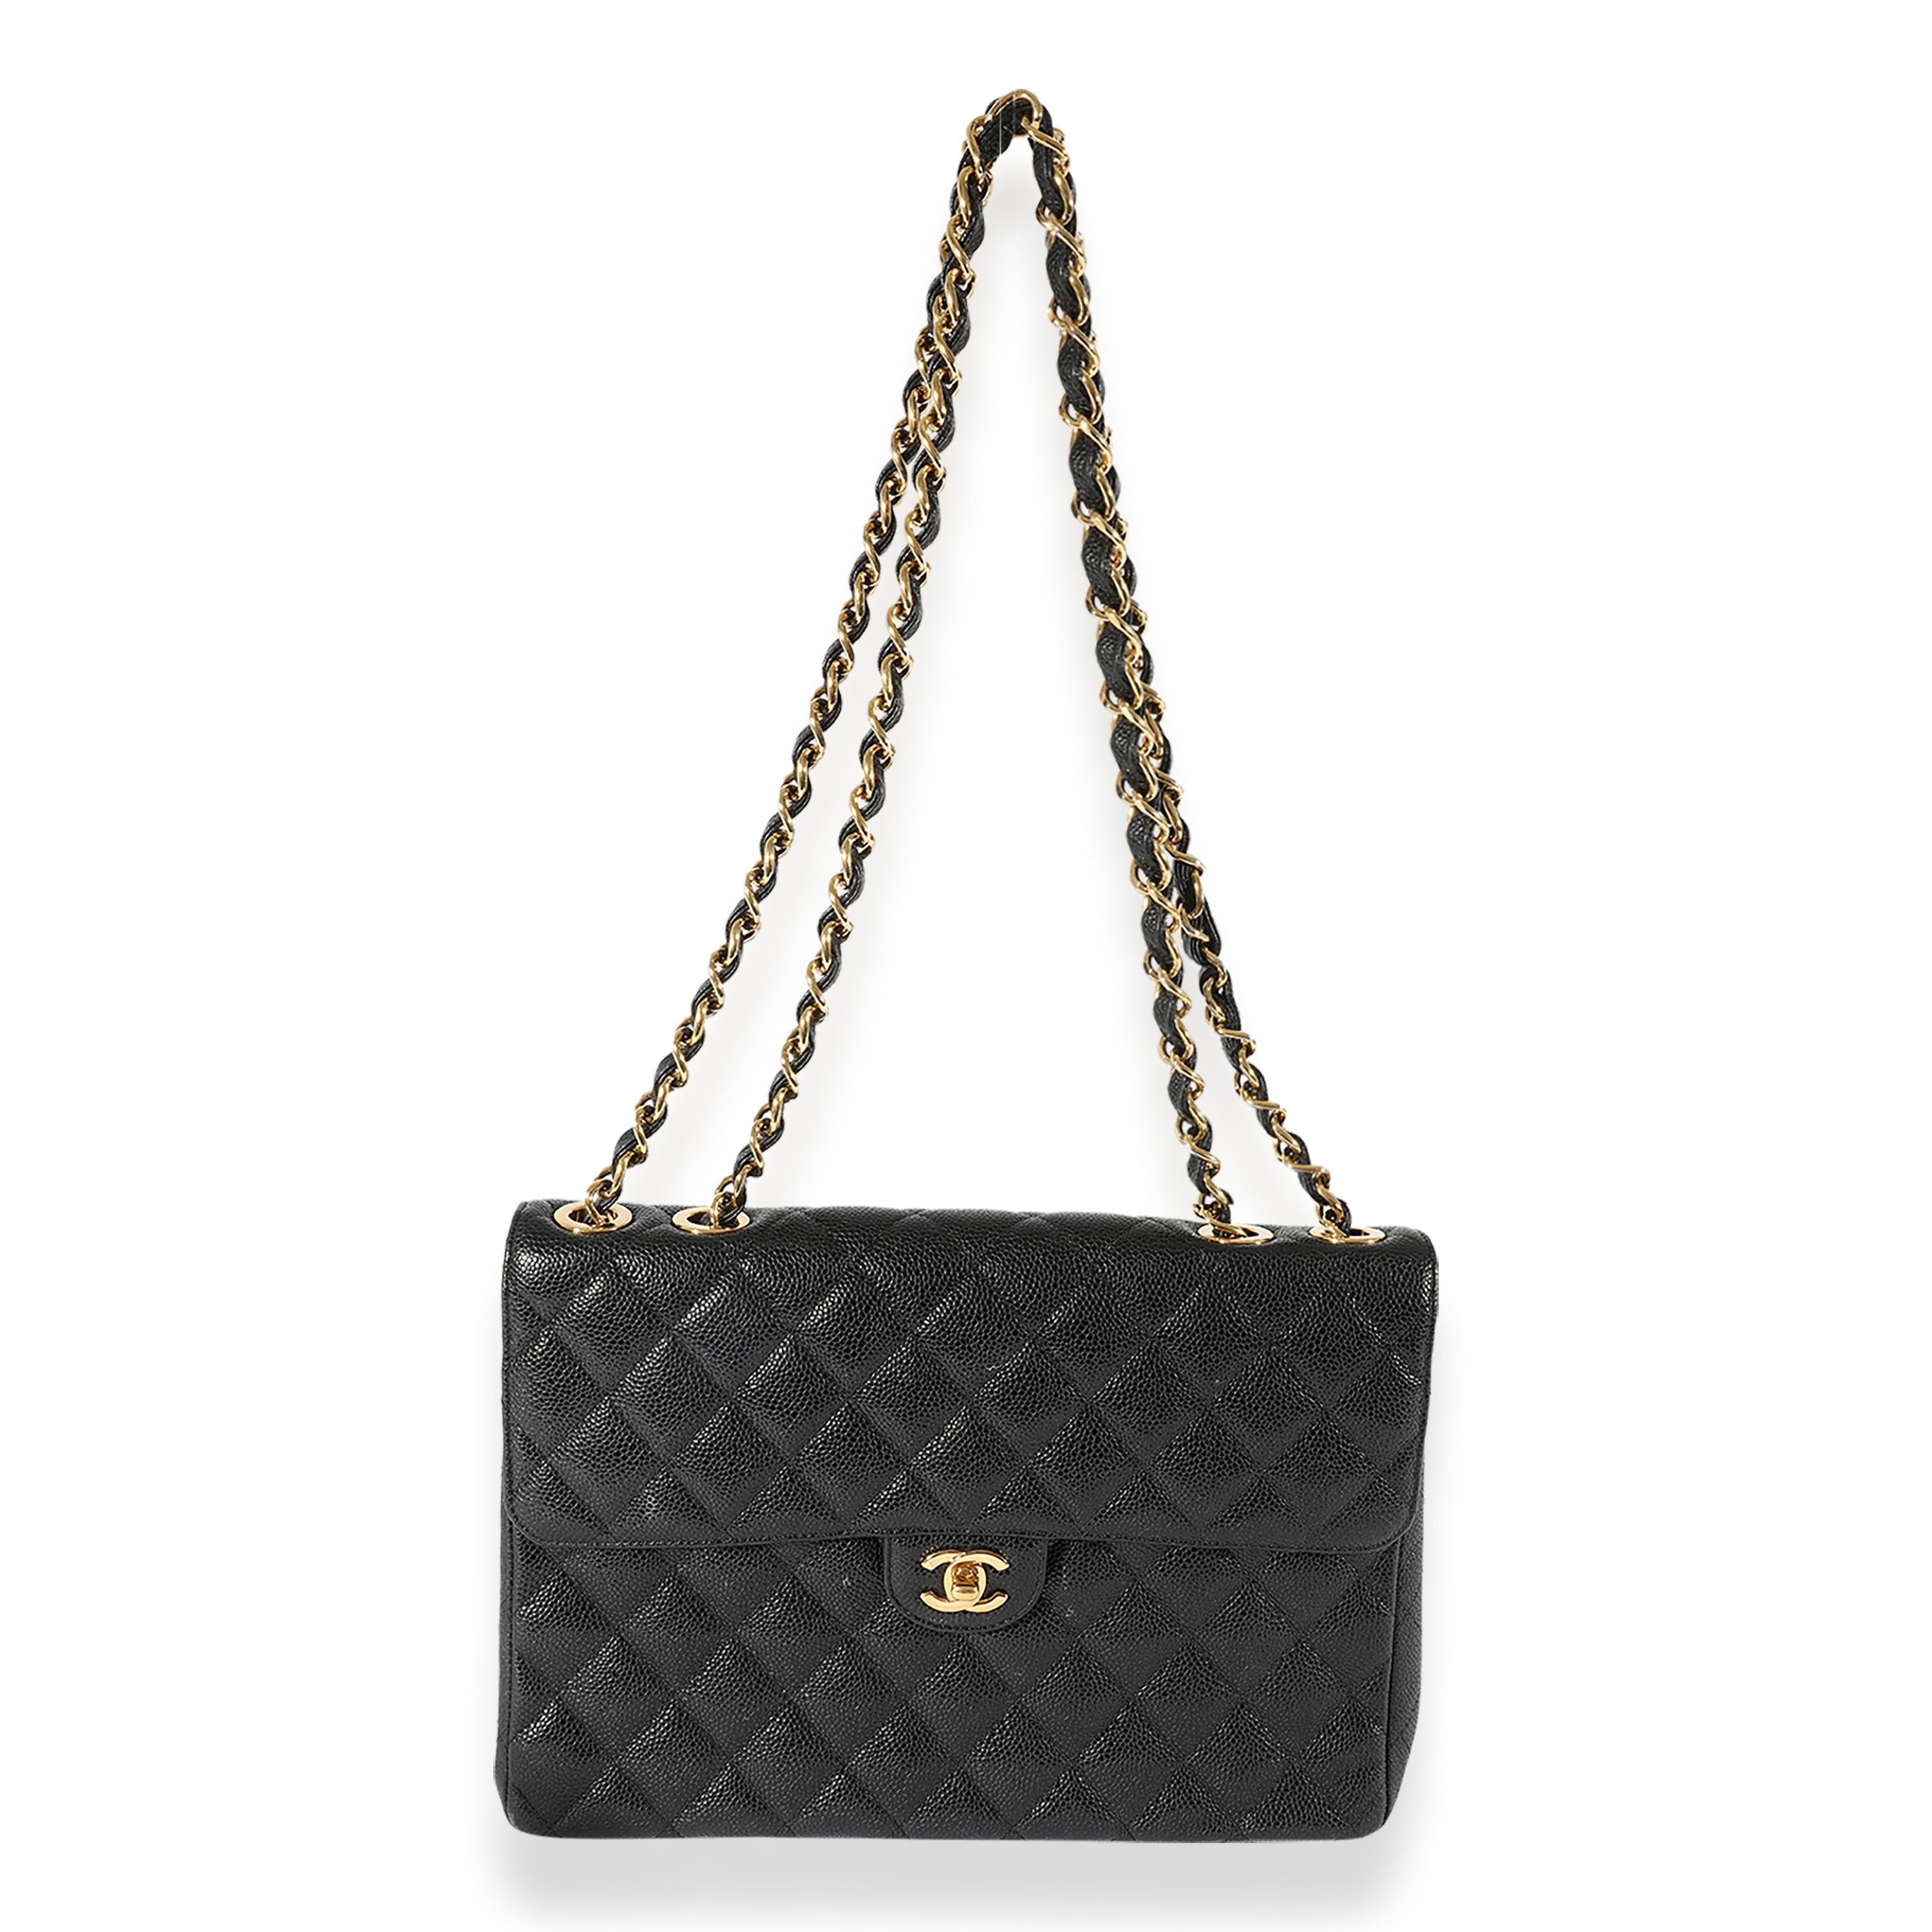 Listing Title: Chanel Vintage Black Caviar 24K Jumbo Classic Flap
SKU: 125218
Condition: Pre-owned 
Handbag Condition: Very Good
Condition Comments: Very Good Condition. Heavy exterior corner scuffing and marks throughout. Scratching at hardware.